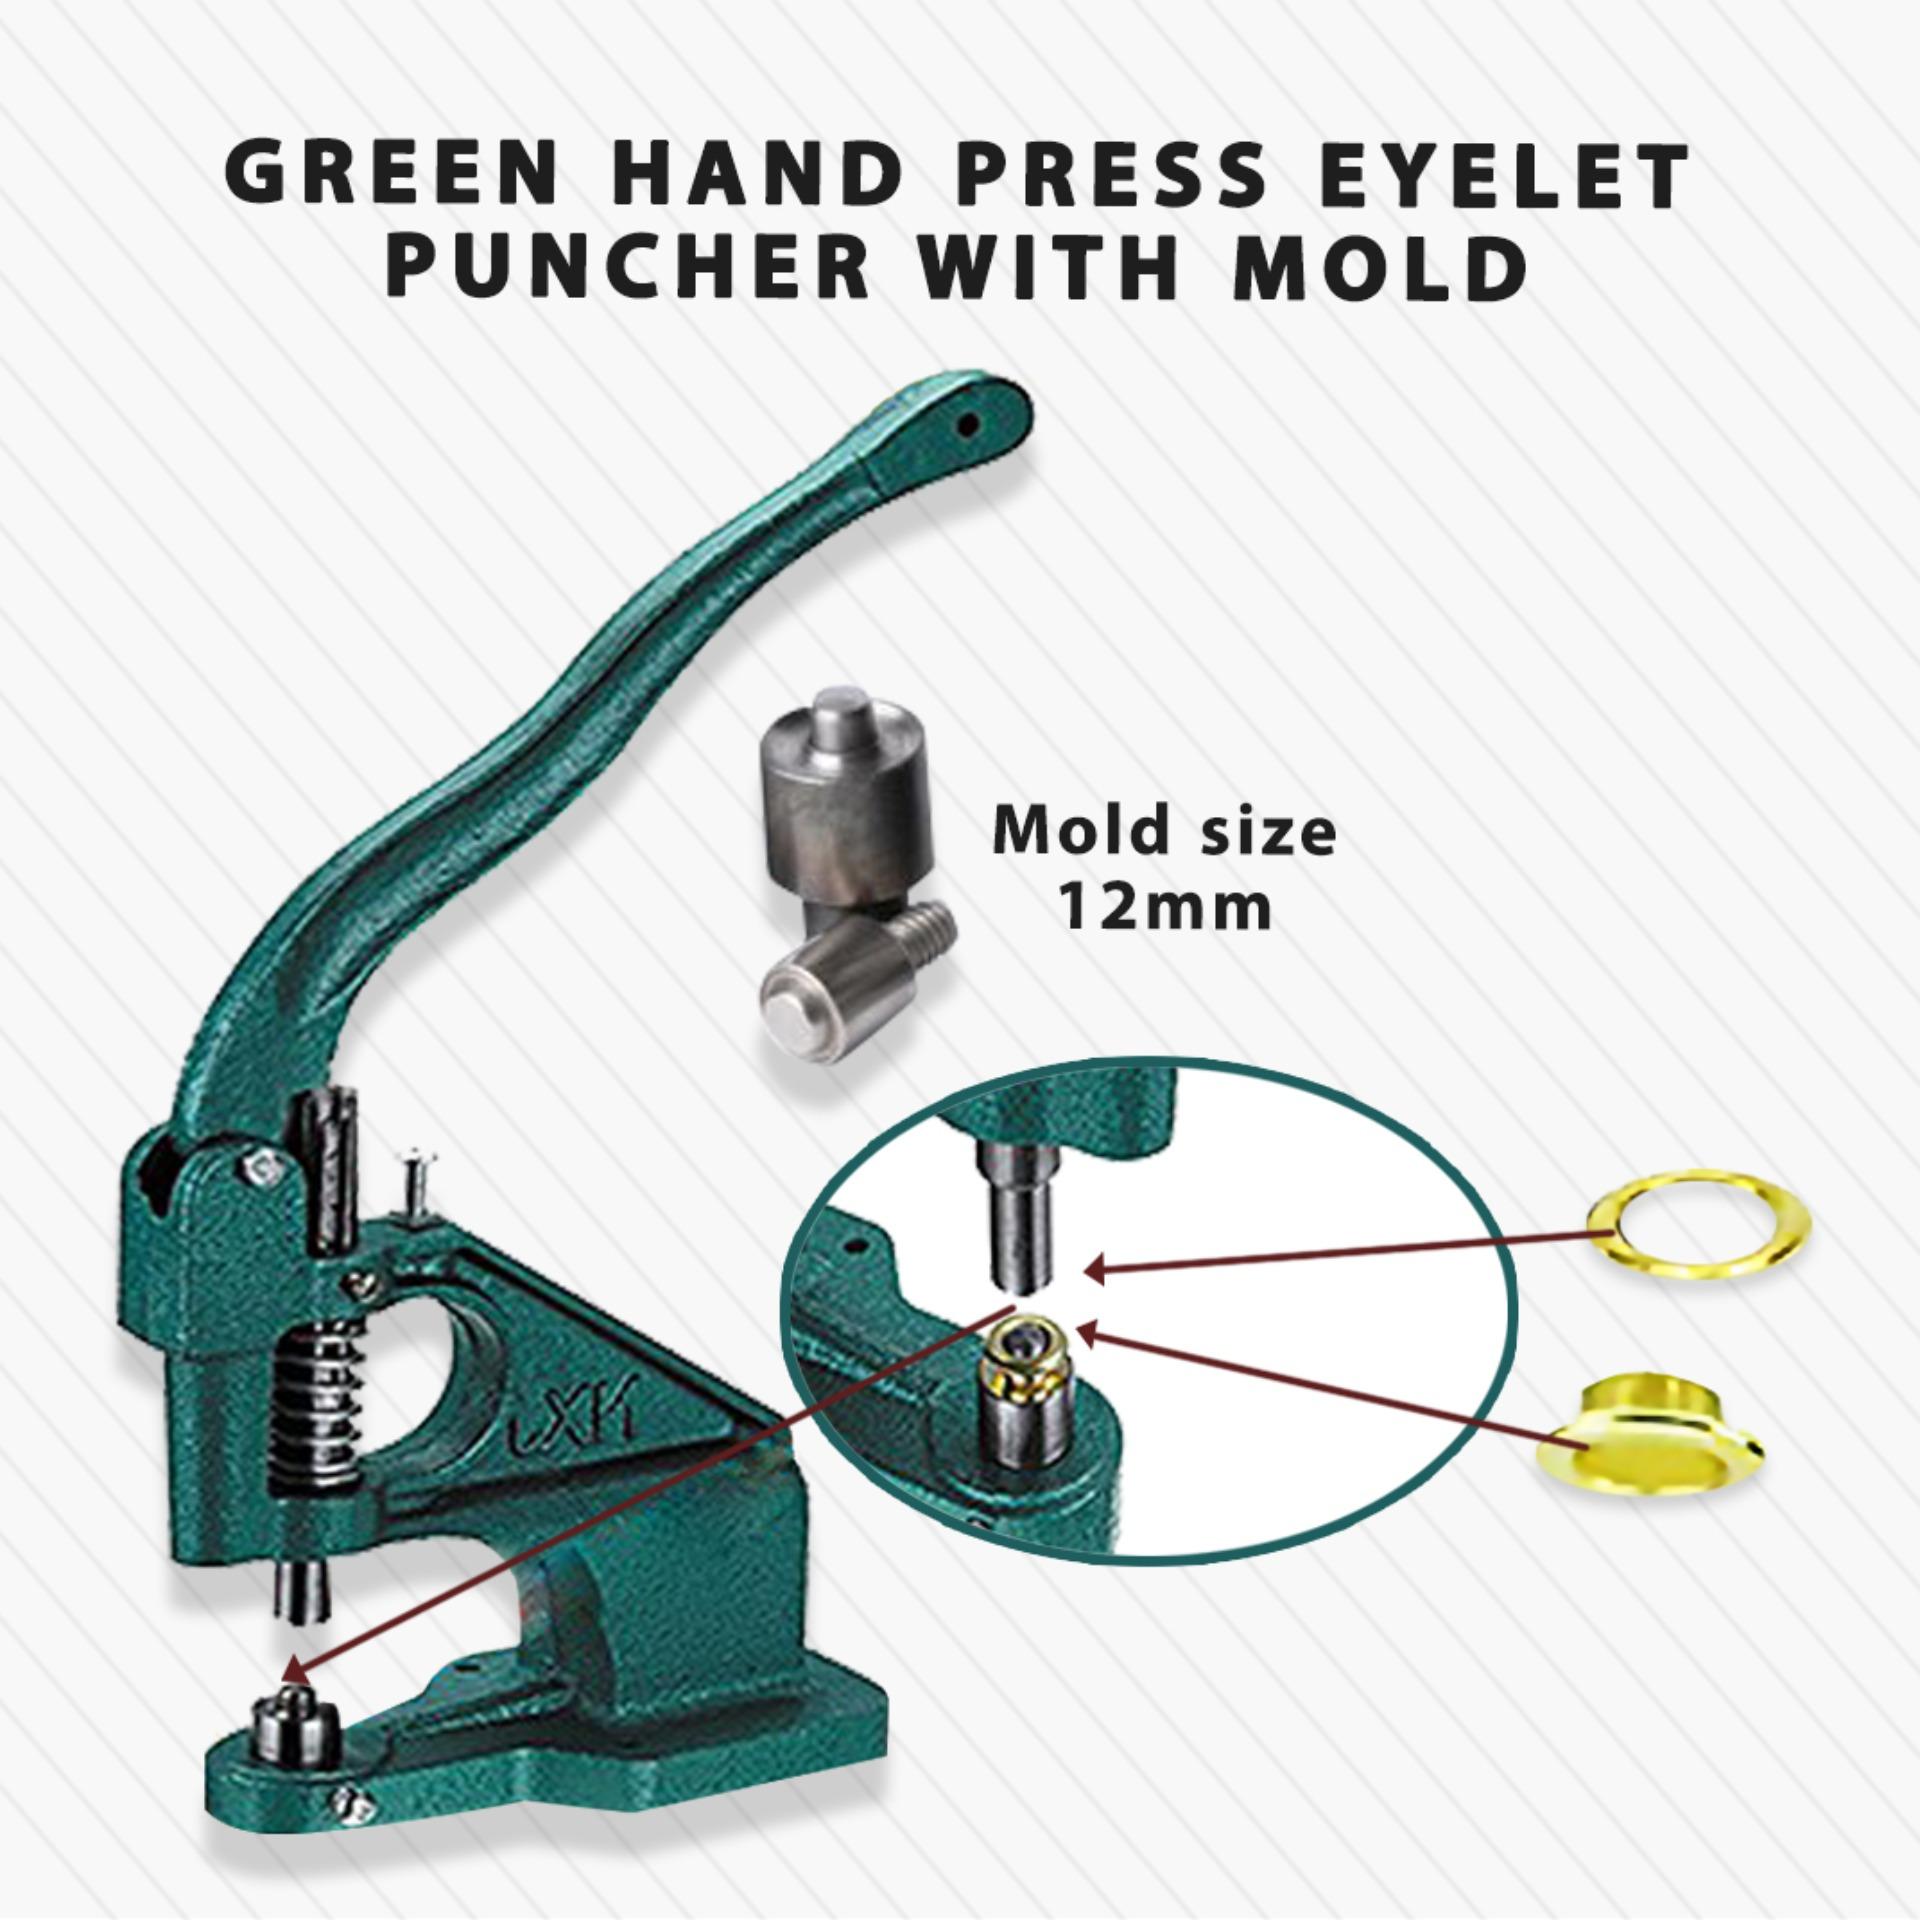 You are currently viewing Grommets or Eyelet Puncher for Tarpaulin